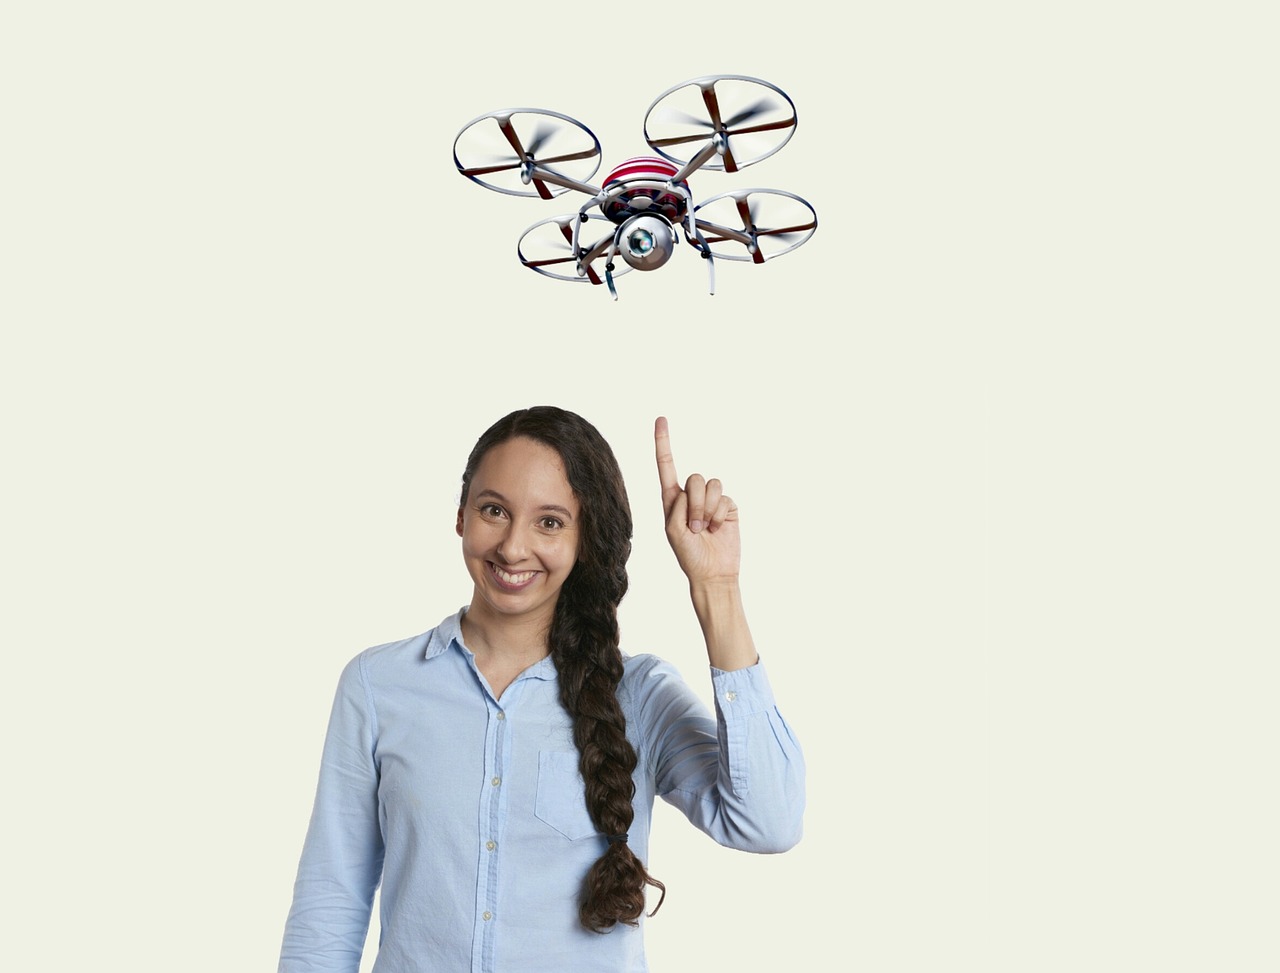 popular types of drones for recreational use